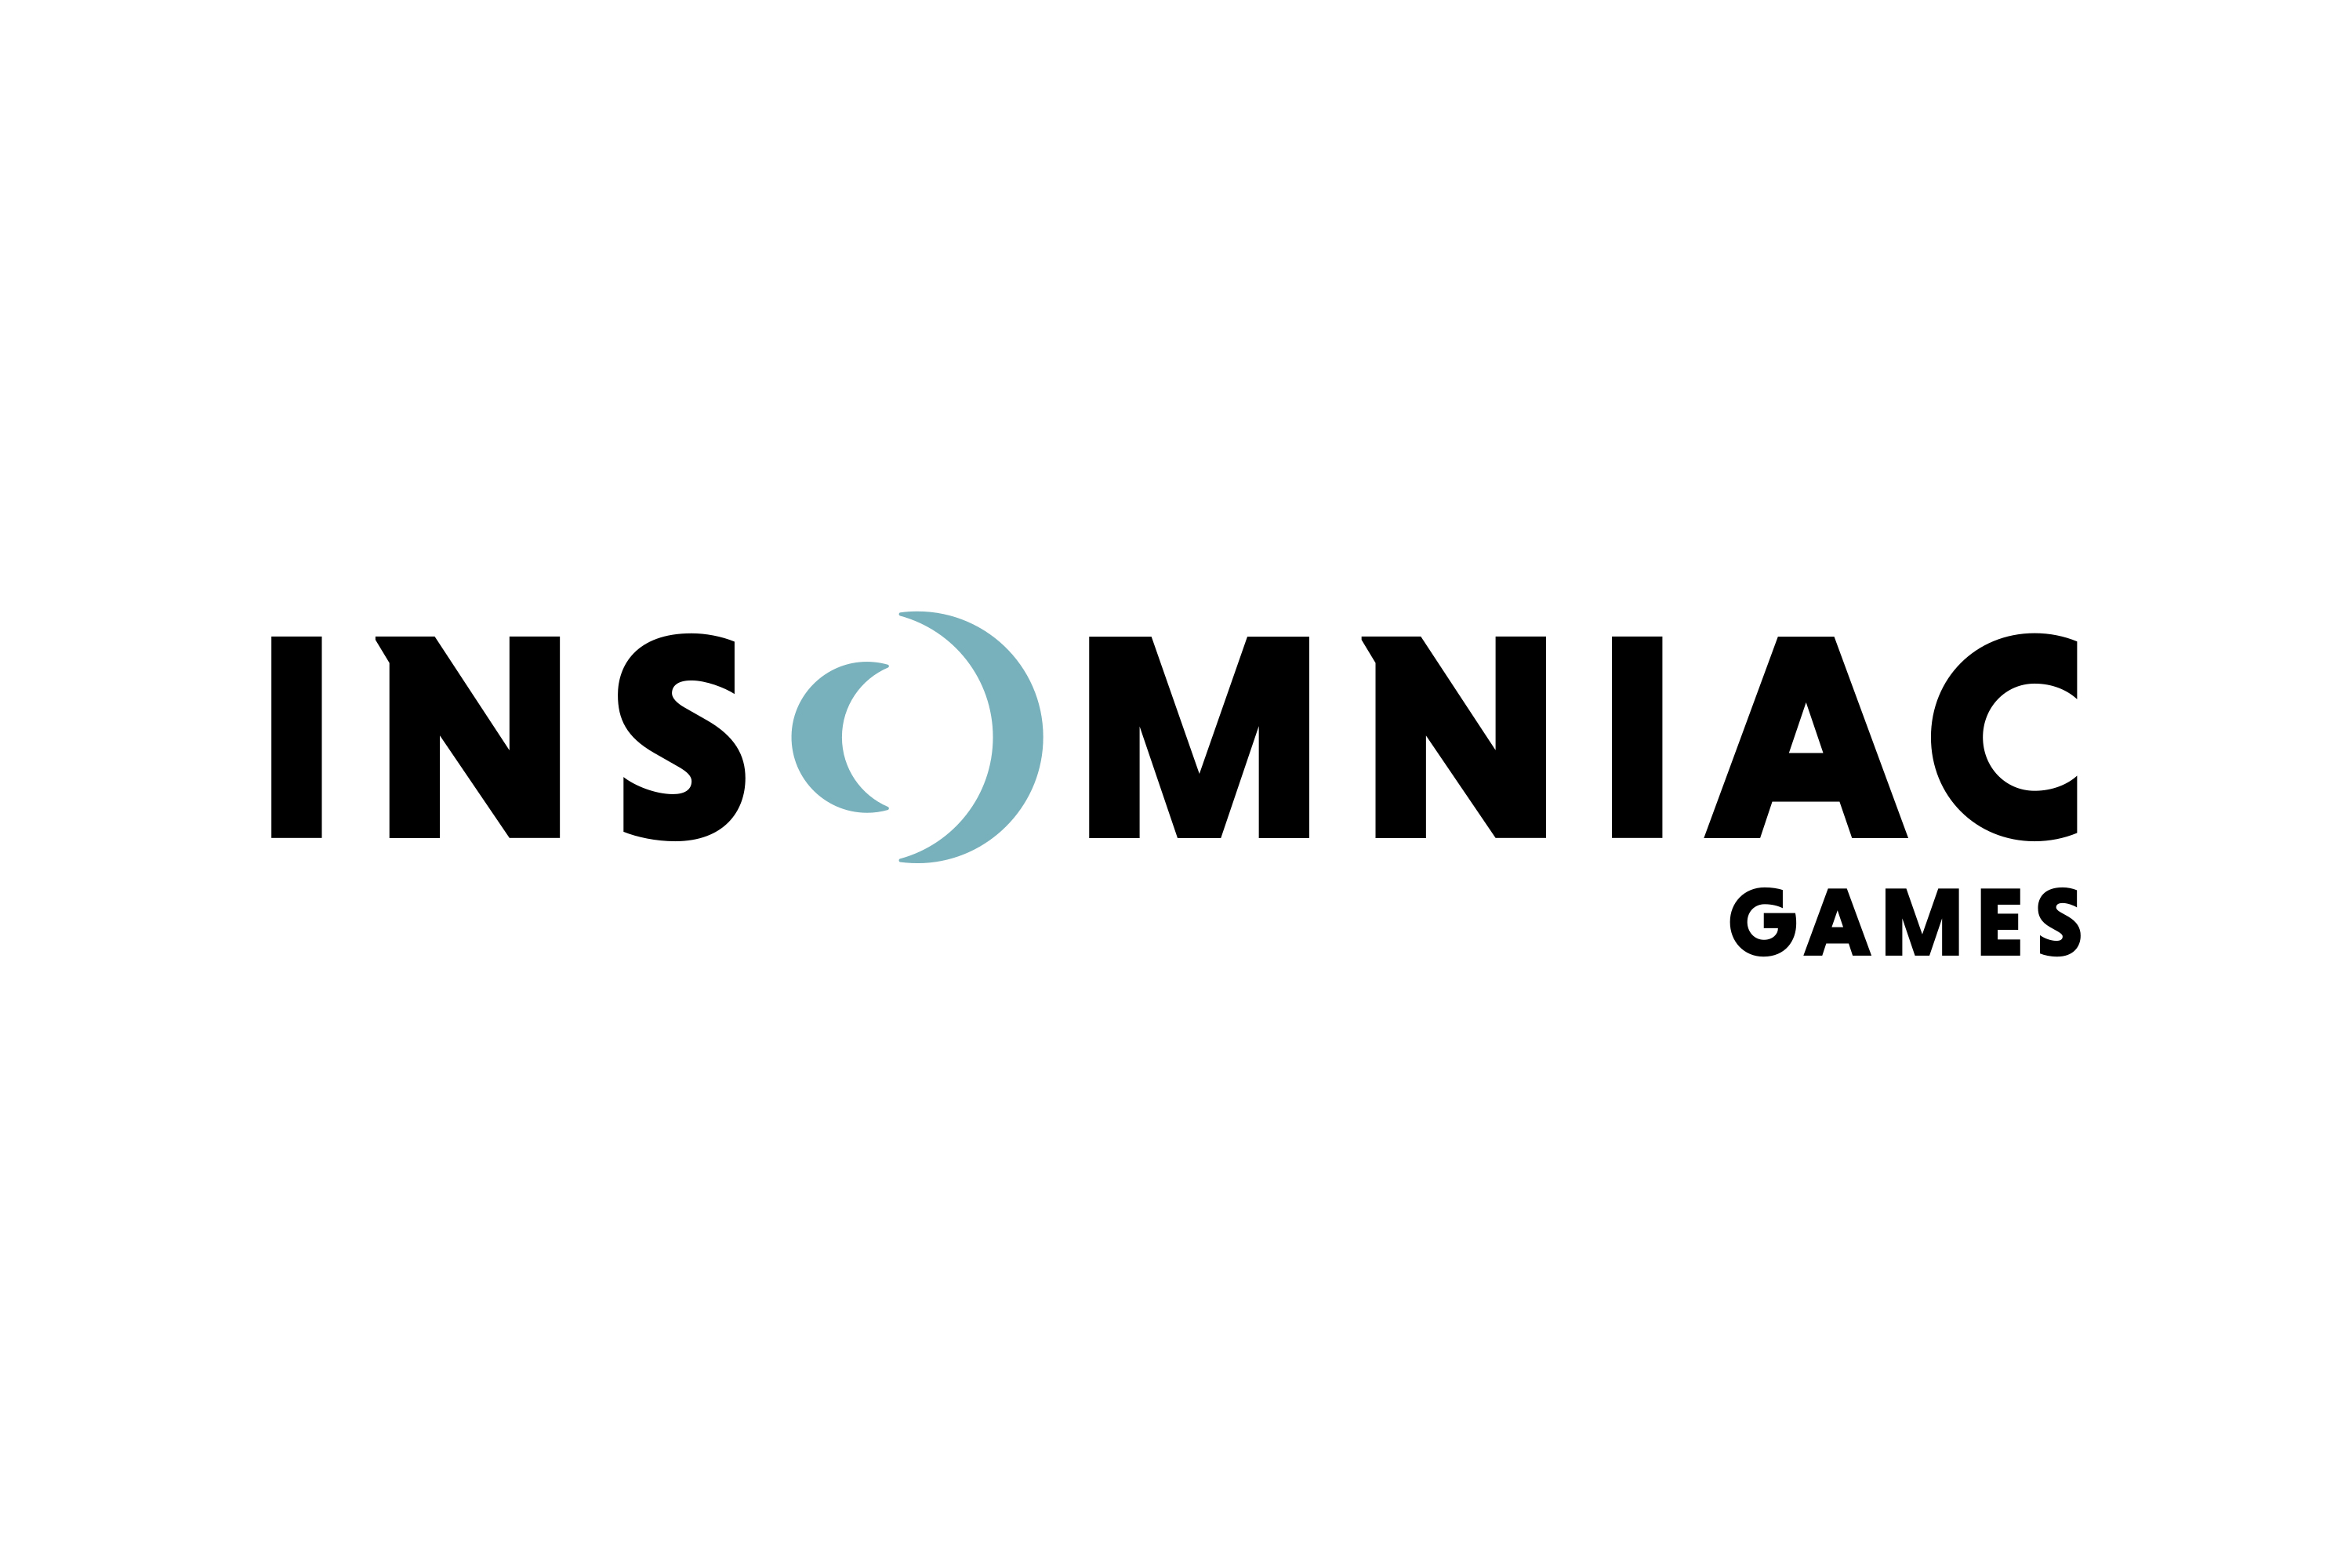 download insomniax